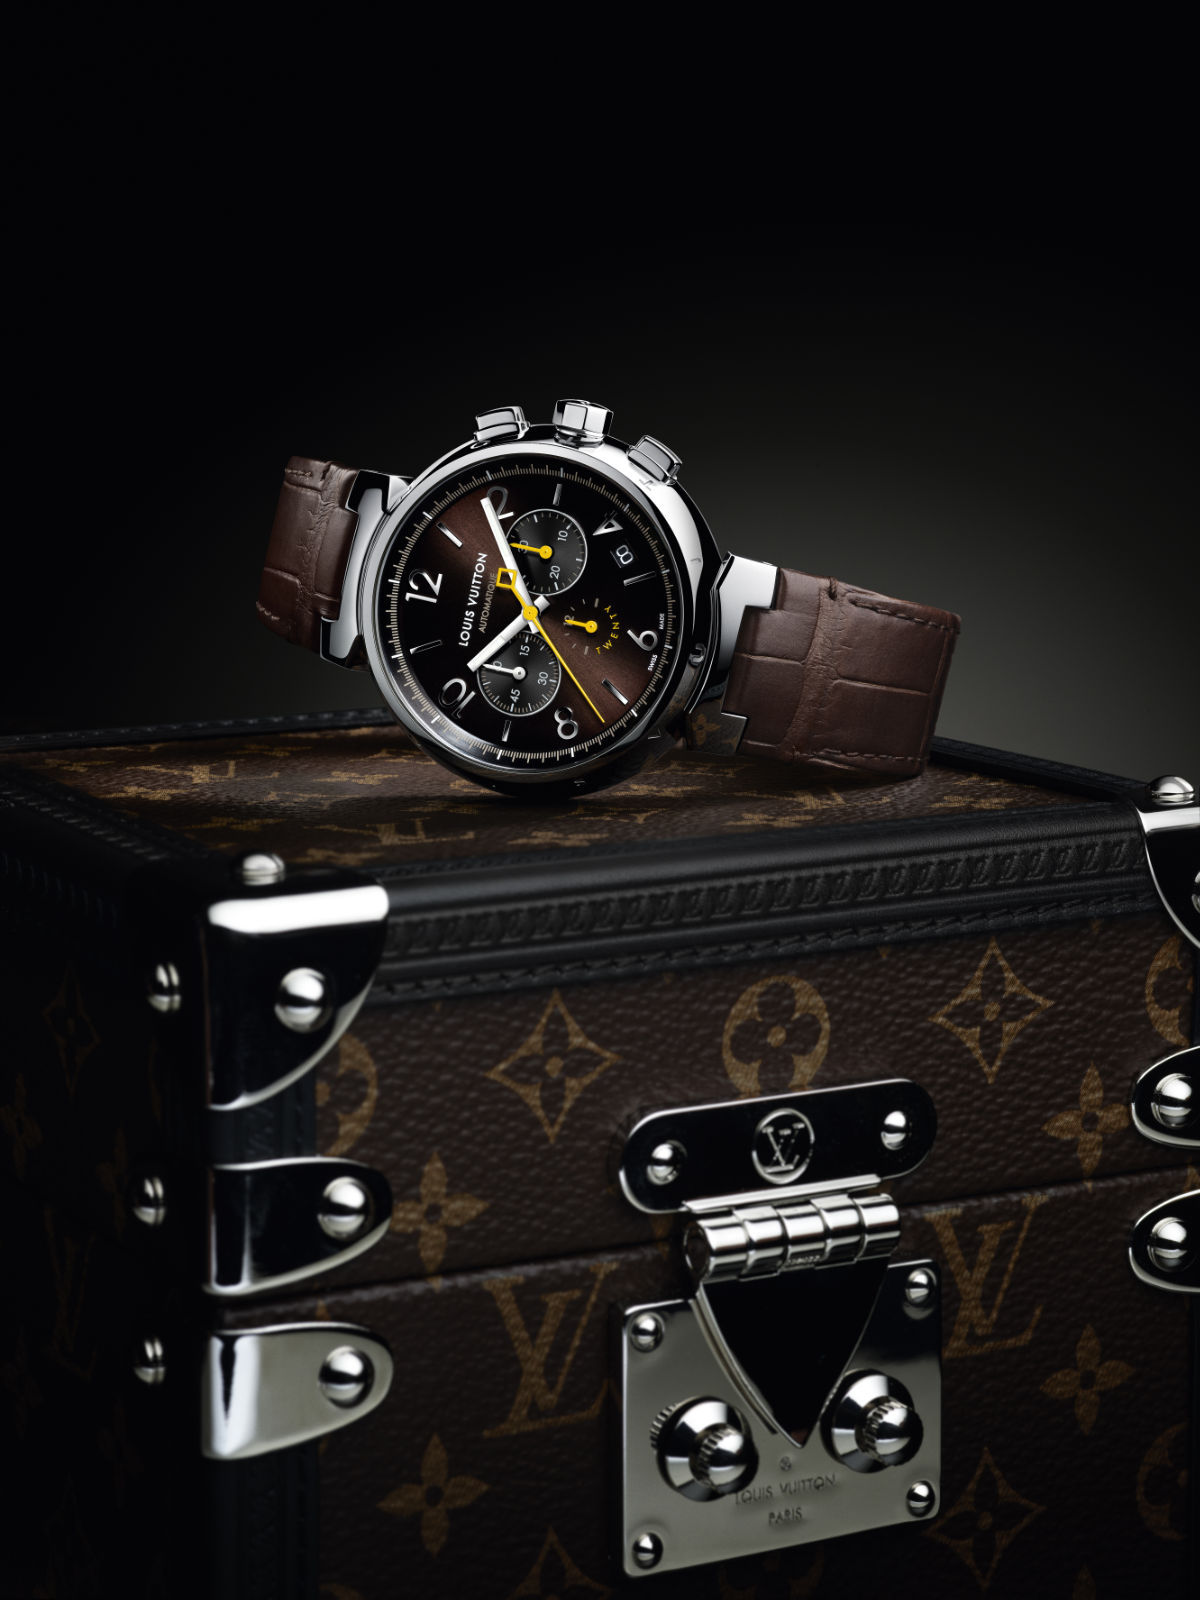 Louis Vuitton Presents Its Latest Connected Watch, The Tambour Horizon  Light Up